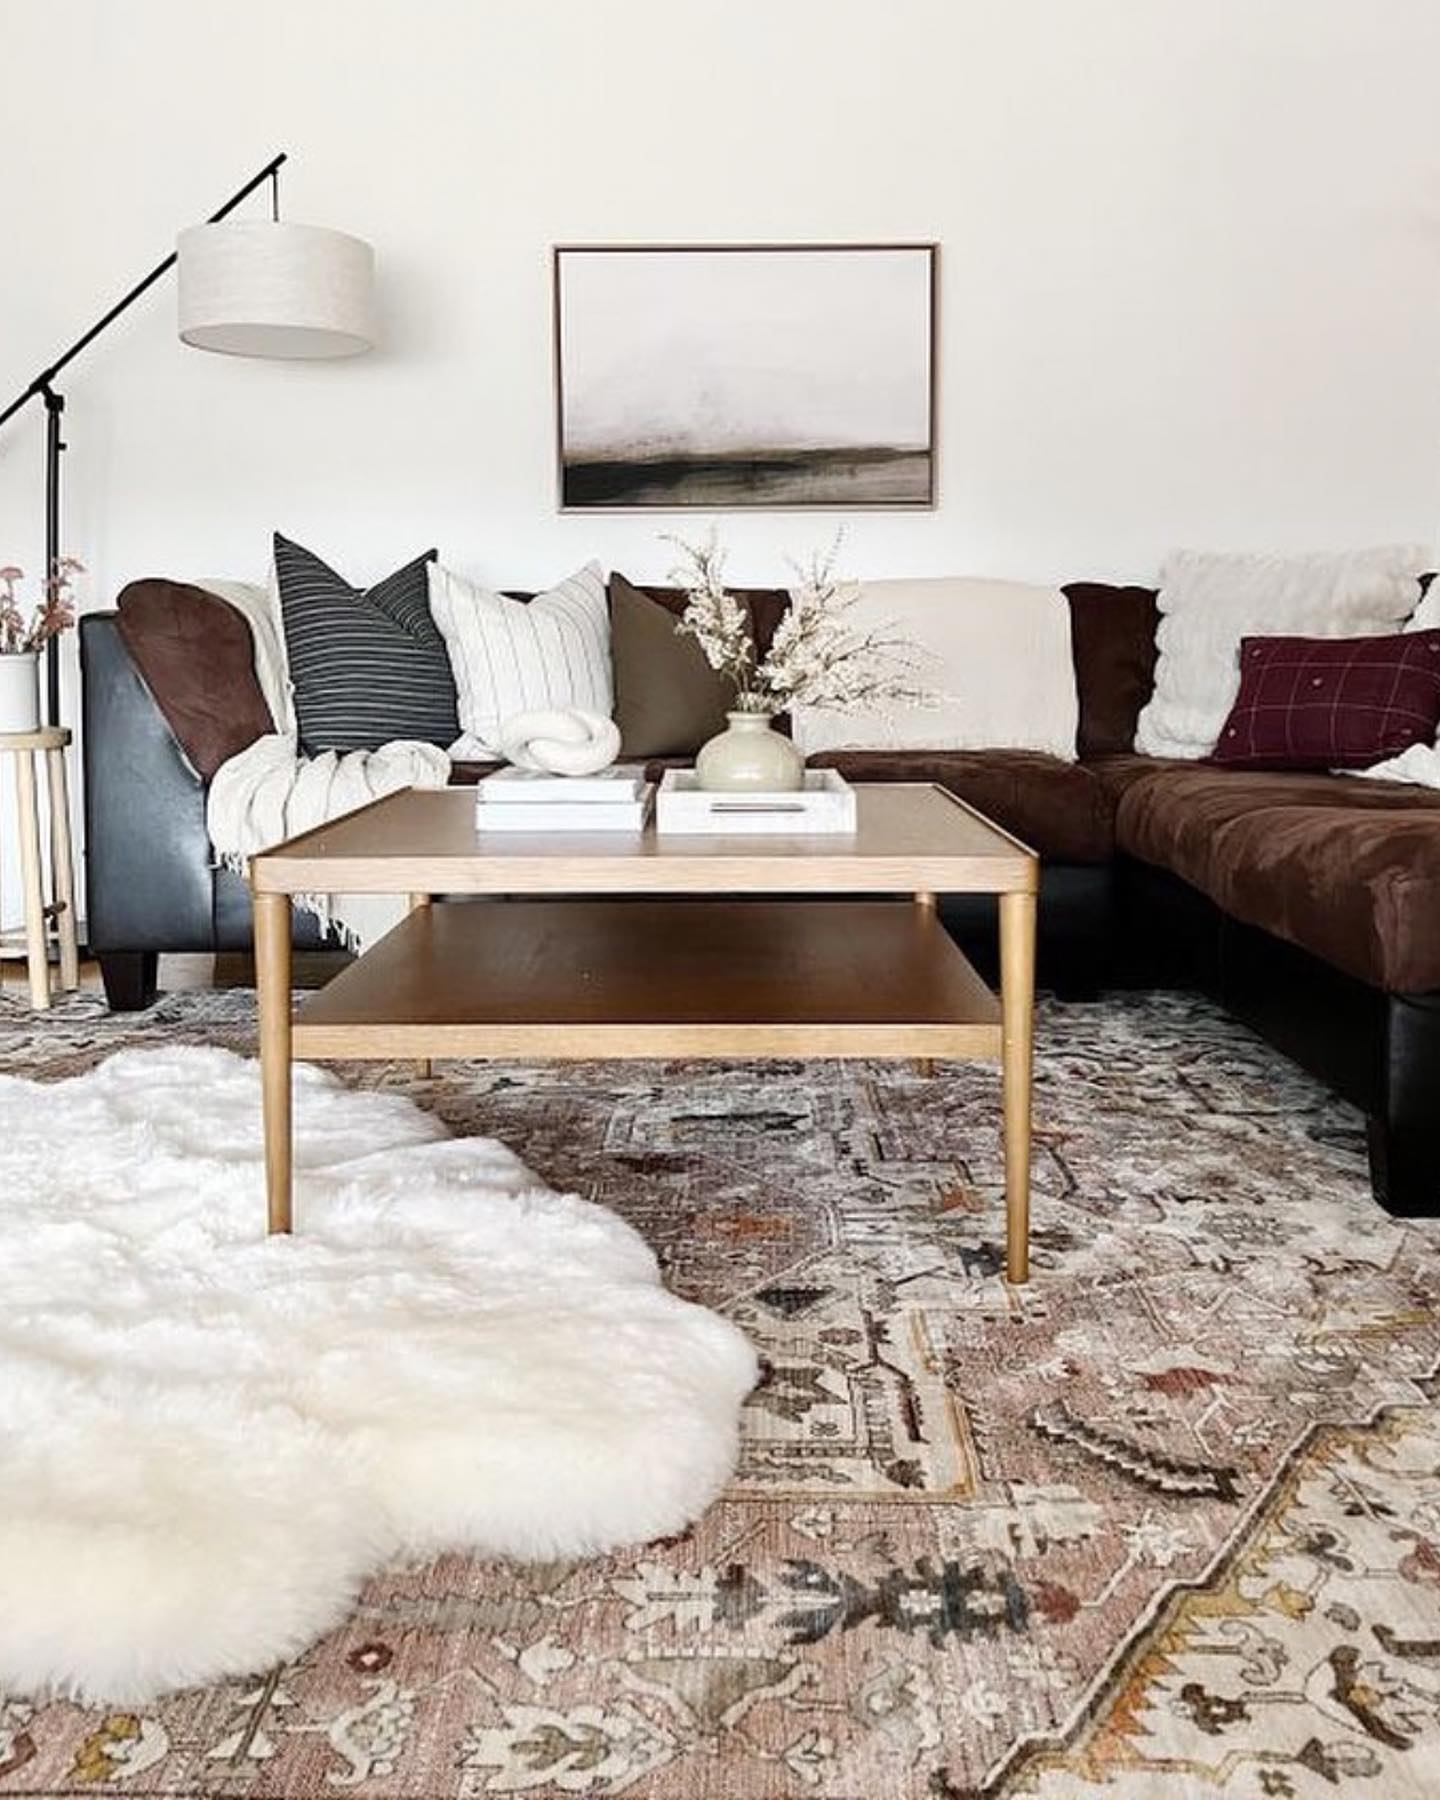 Rugs You'll Love in 2023